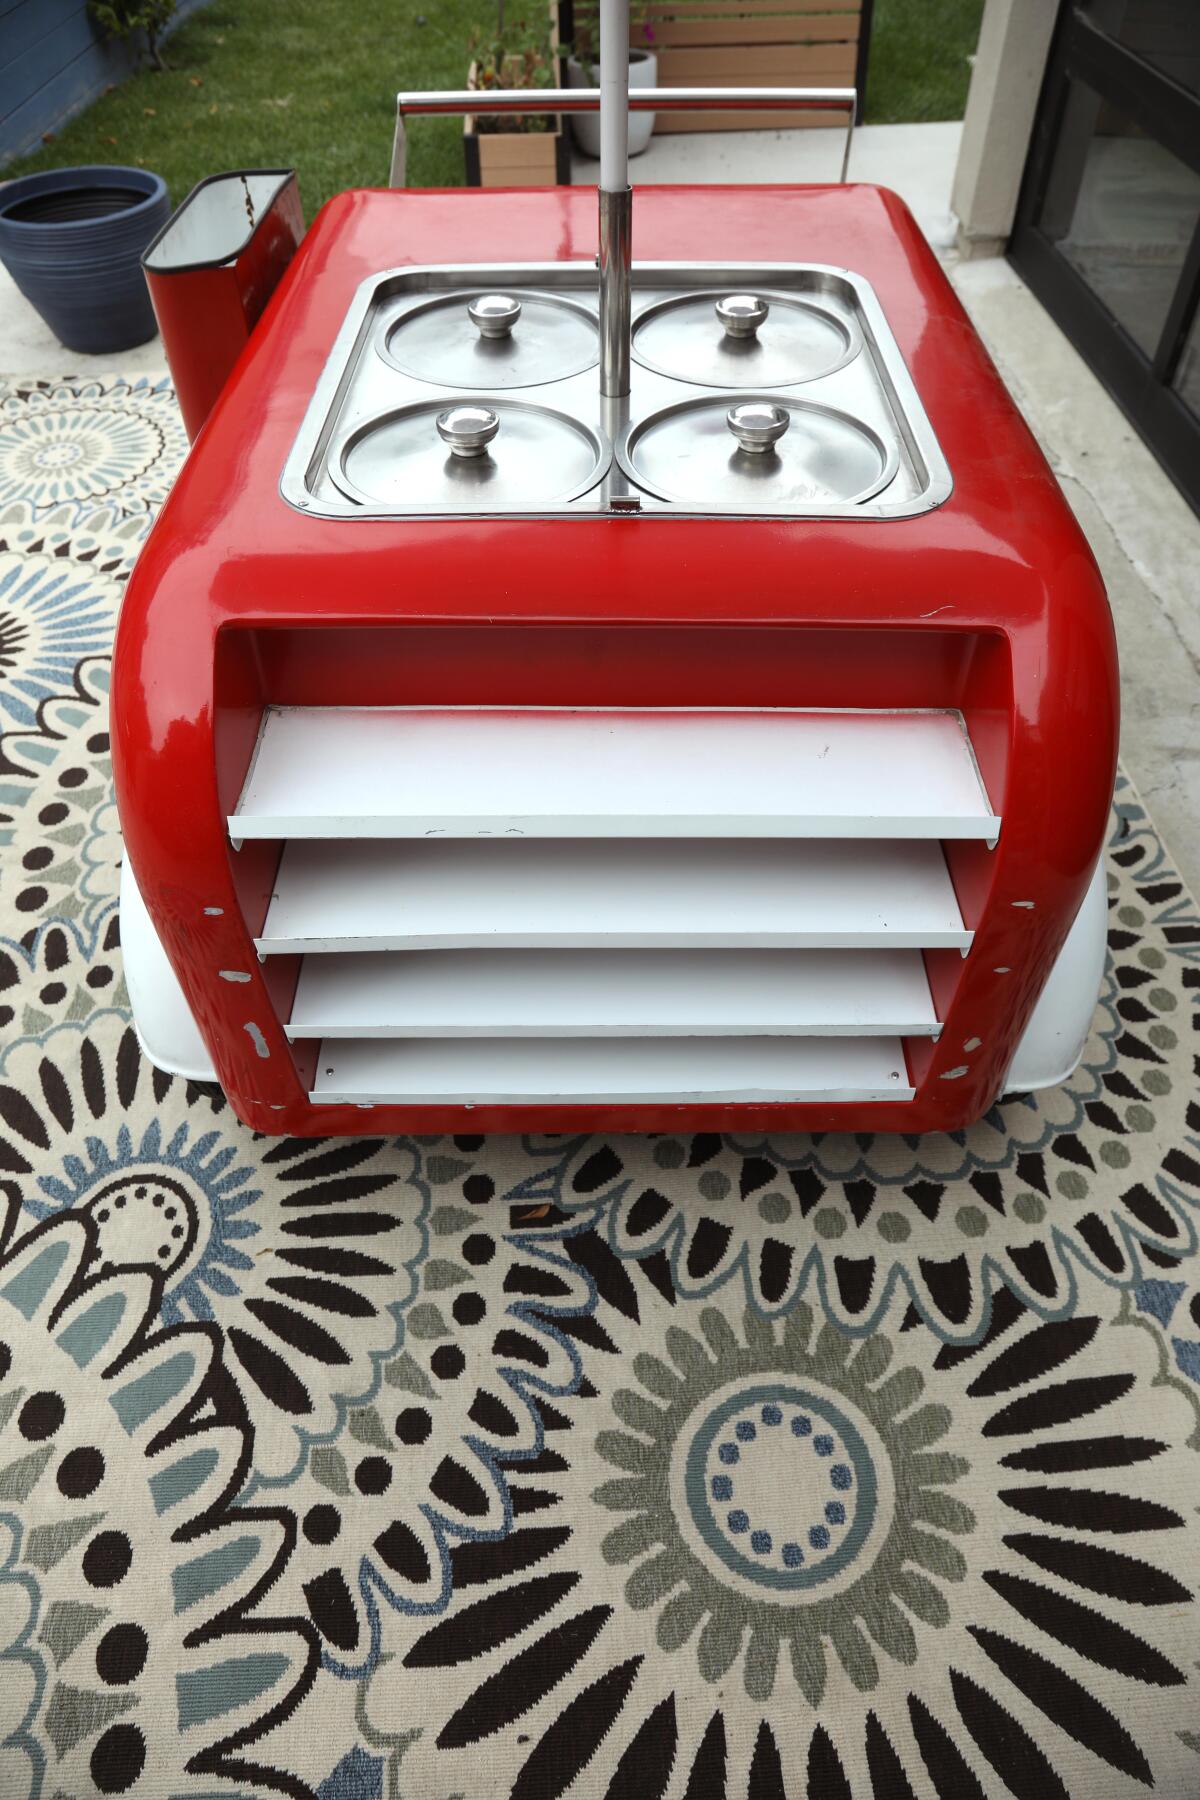 A red cart with four caps in the middle of its surface.